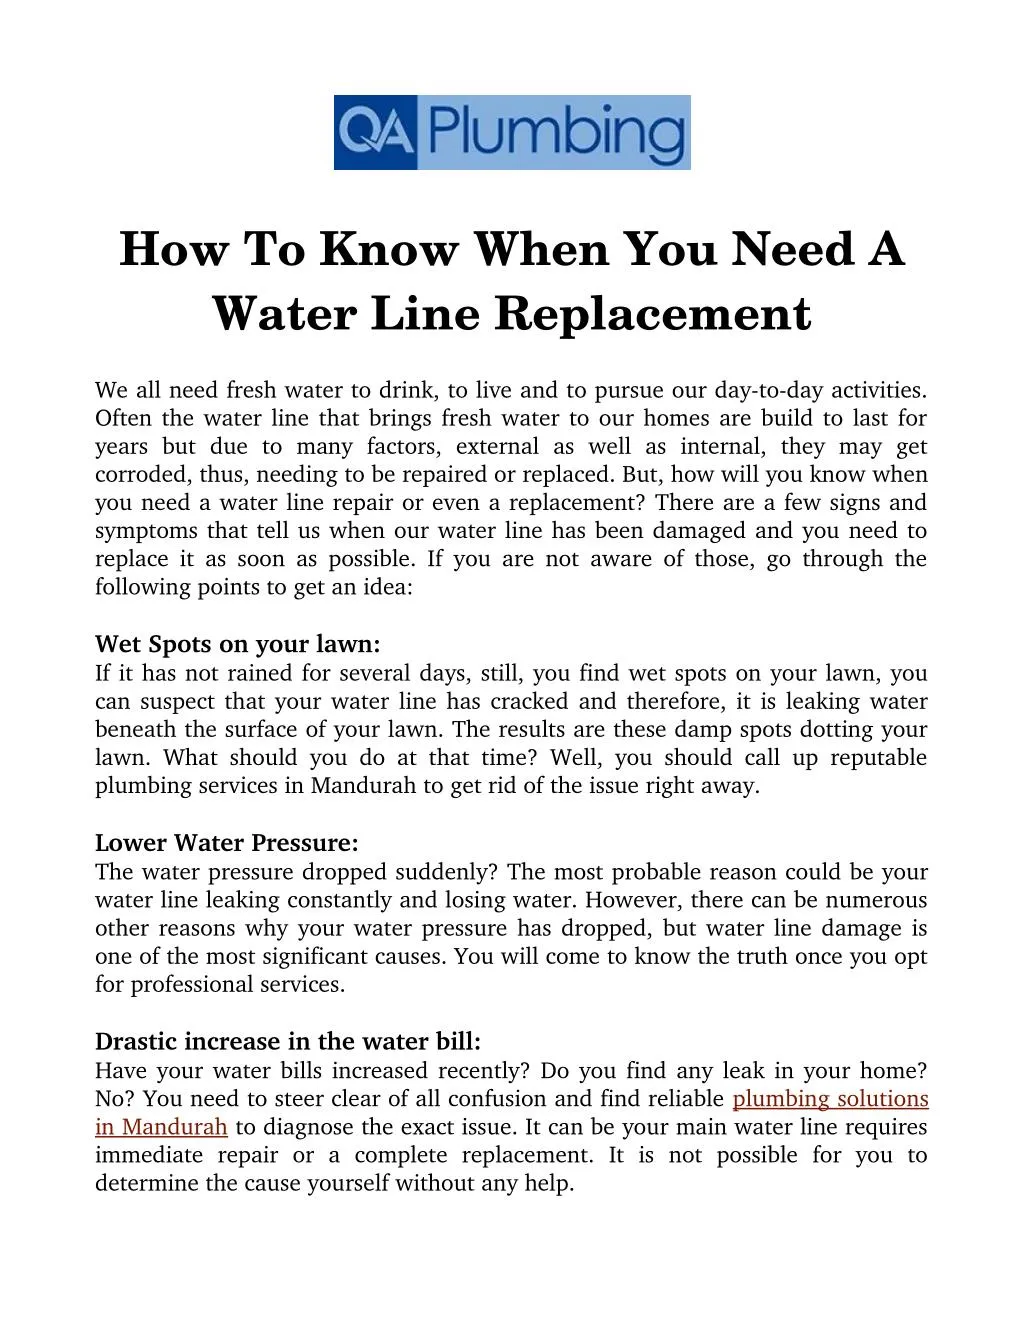 how to know when you need a water line replacement